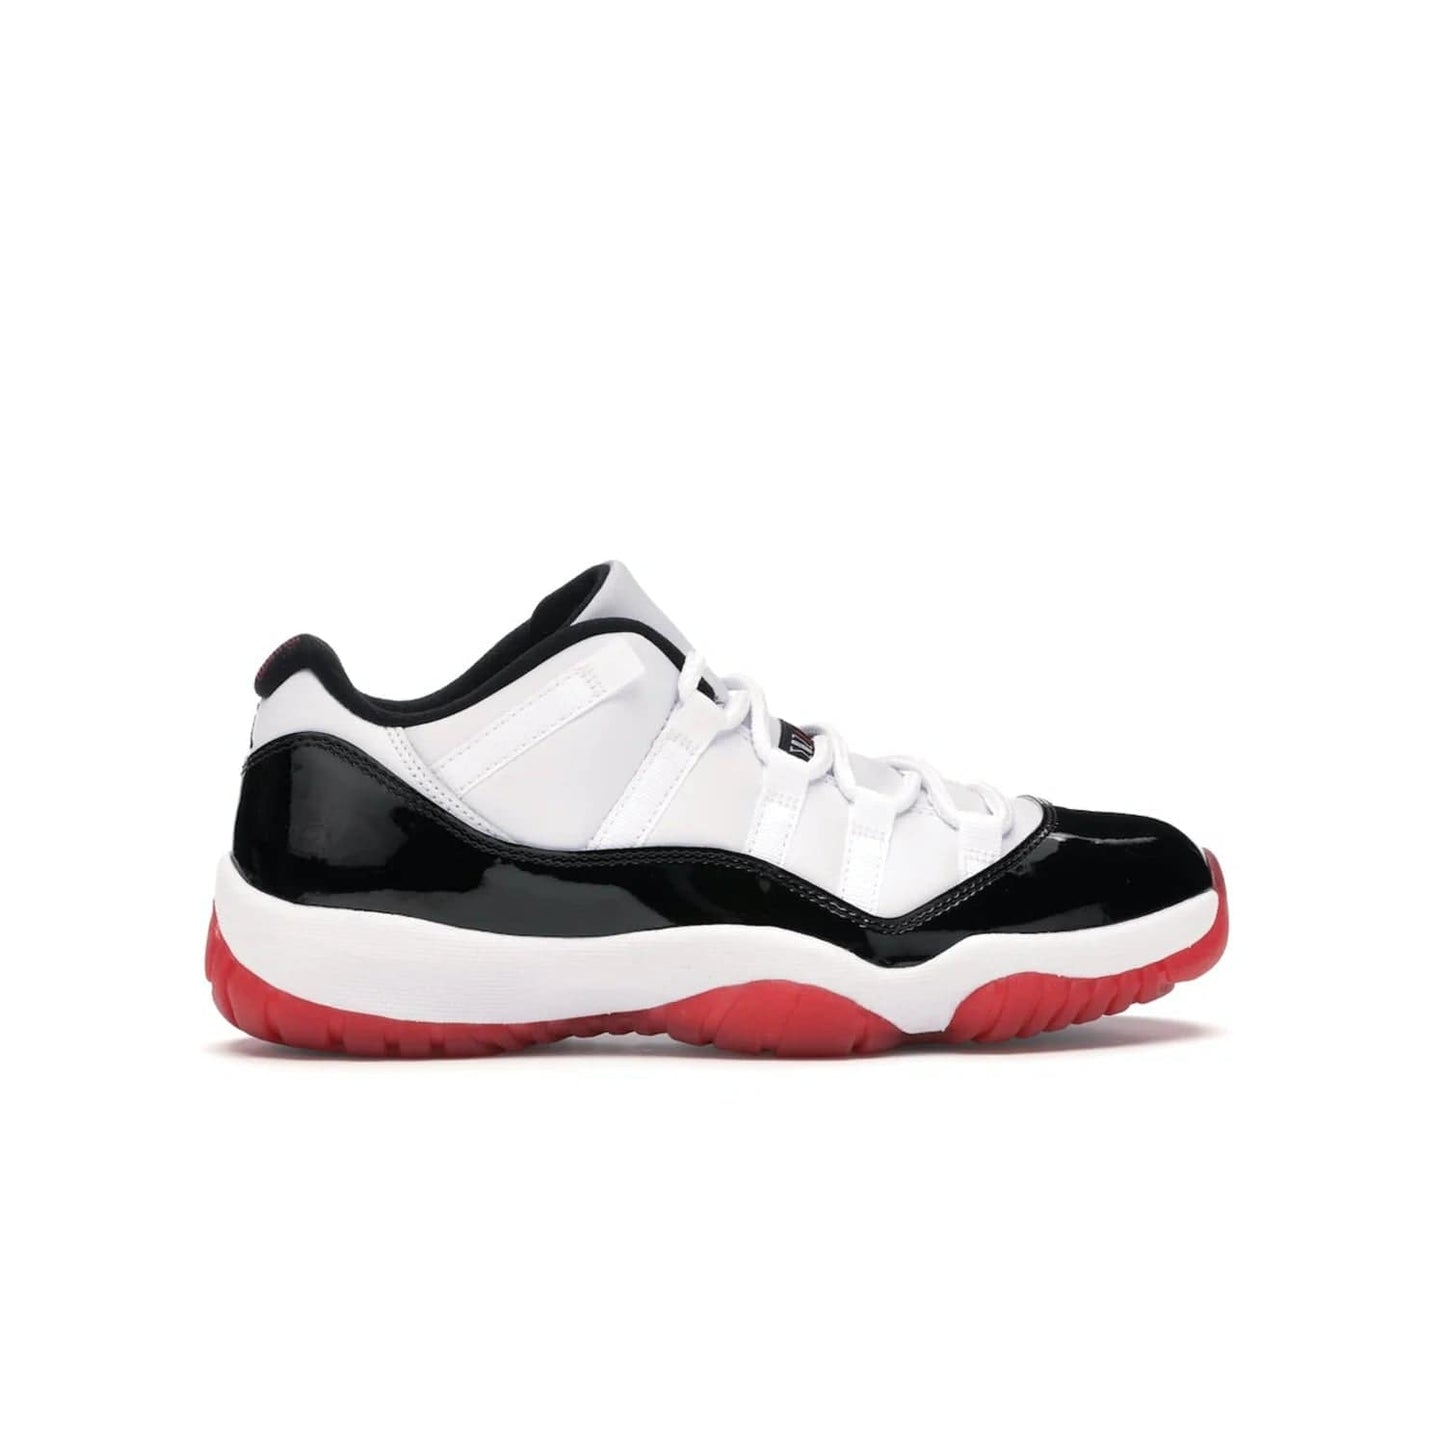 Jordan 11 Retro Low Concord Bred - Image 36 - Only at www.BallersClubKickz.com - Grab the classic Jordan 11 look with the Jordan 11 Retro Low Concord Bred. With white and black elements and the iconic red outsole of the Jordan 11 Bred, you won't miss a beat. Released in June 2020, the perfect complement to any outfit.